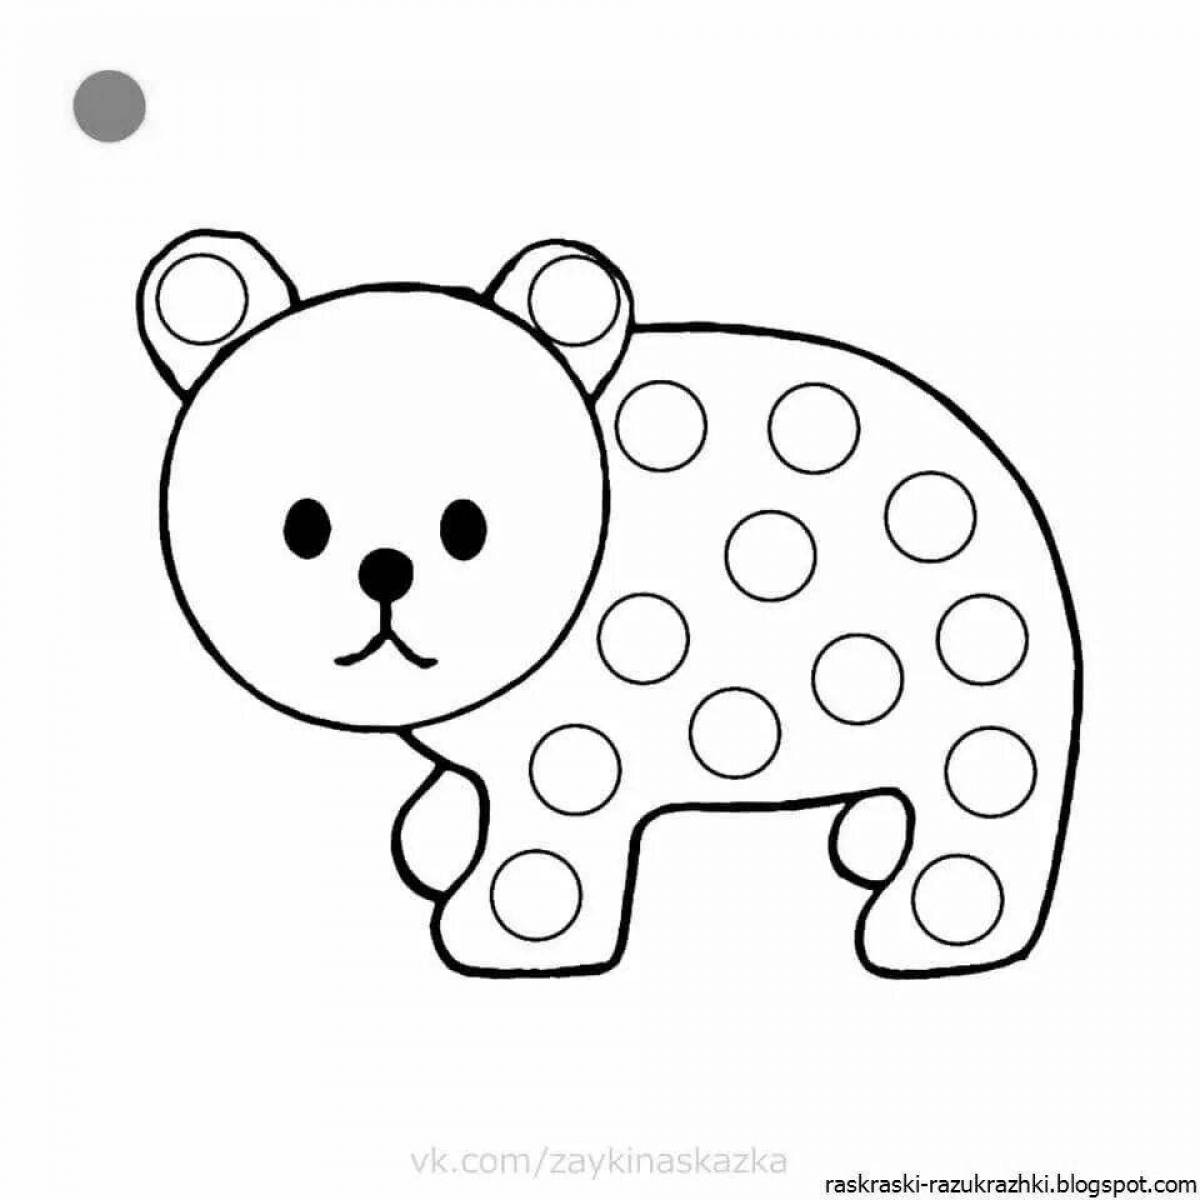 Exciting 2 year old finger coloring page